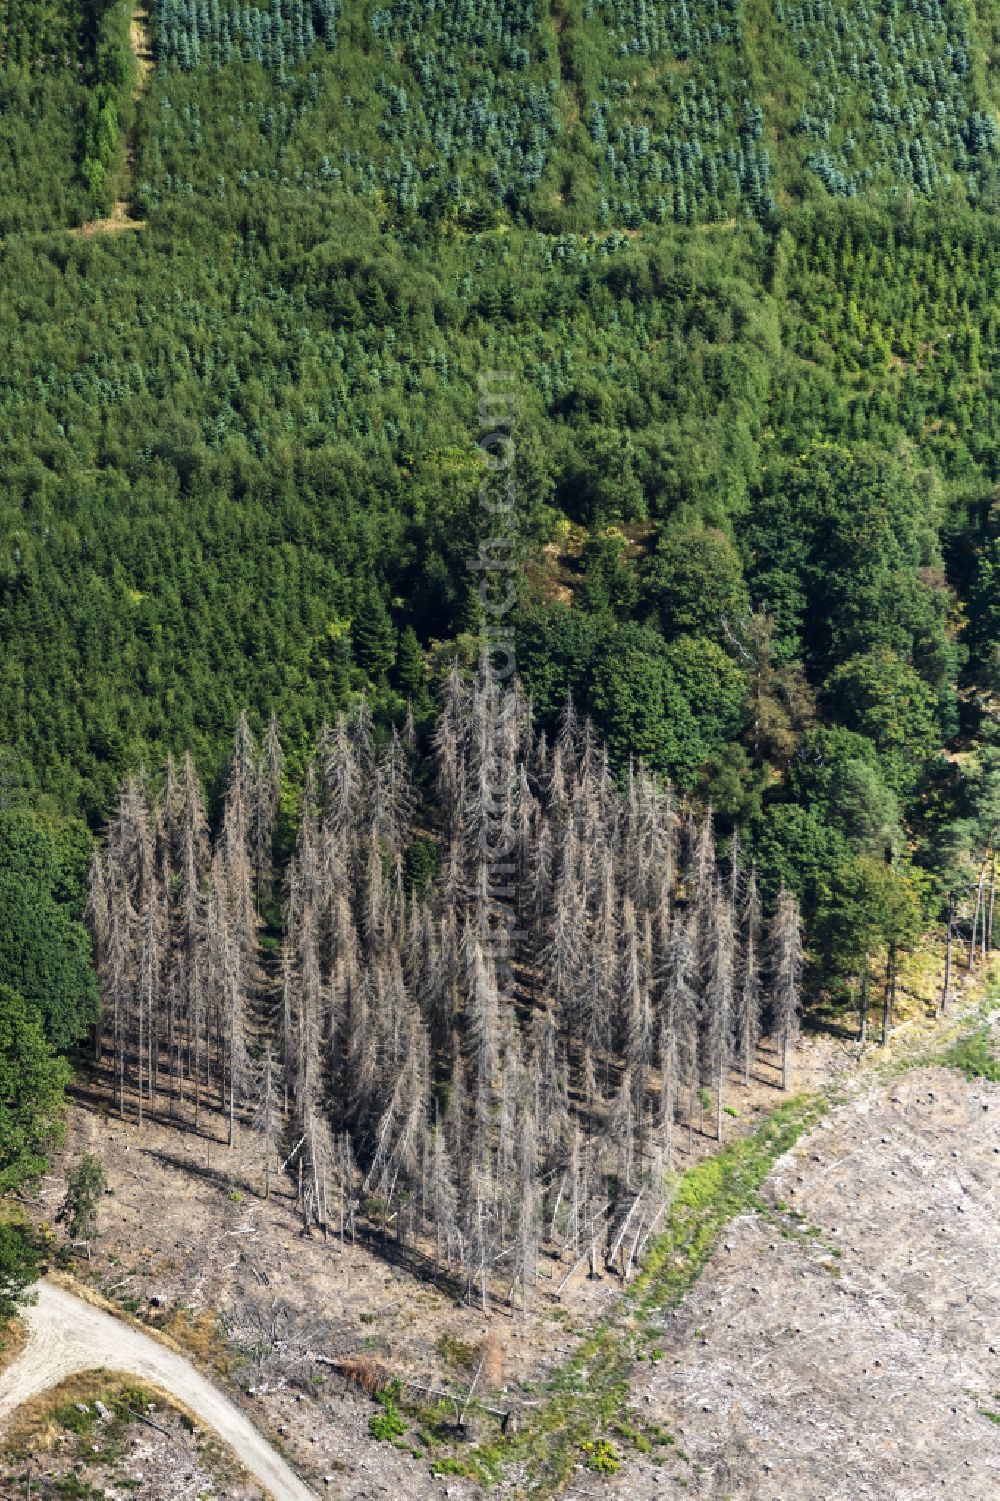 Engelskirchen from the bird's eye view: Tree dying and forest dying with skeletons of dead trees in the remnants of a forest area in Engelskirchen in the state North Rhine-Westphalia, Germany